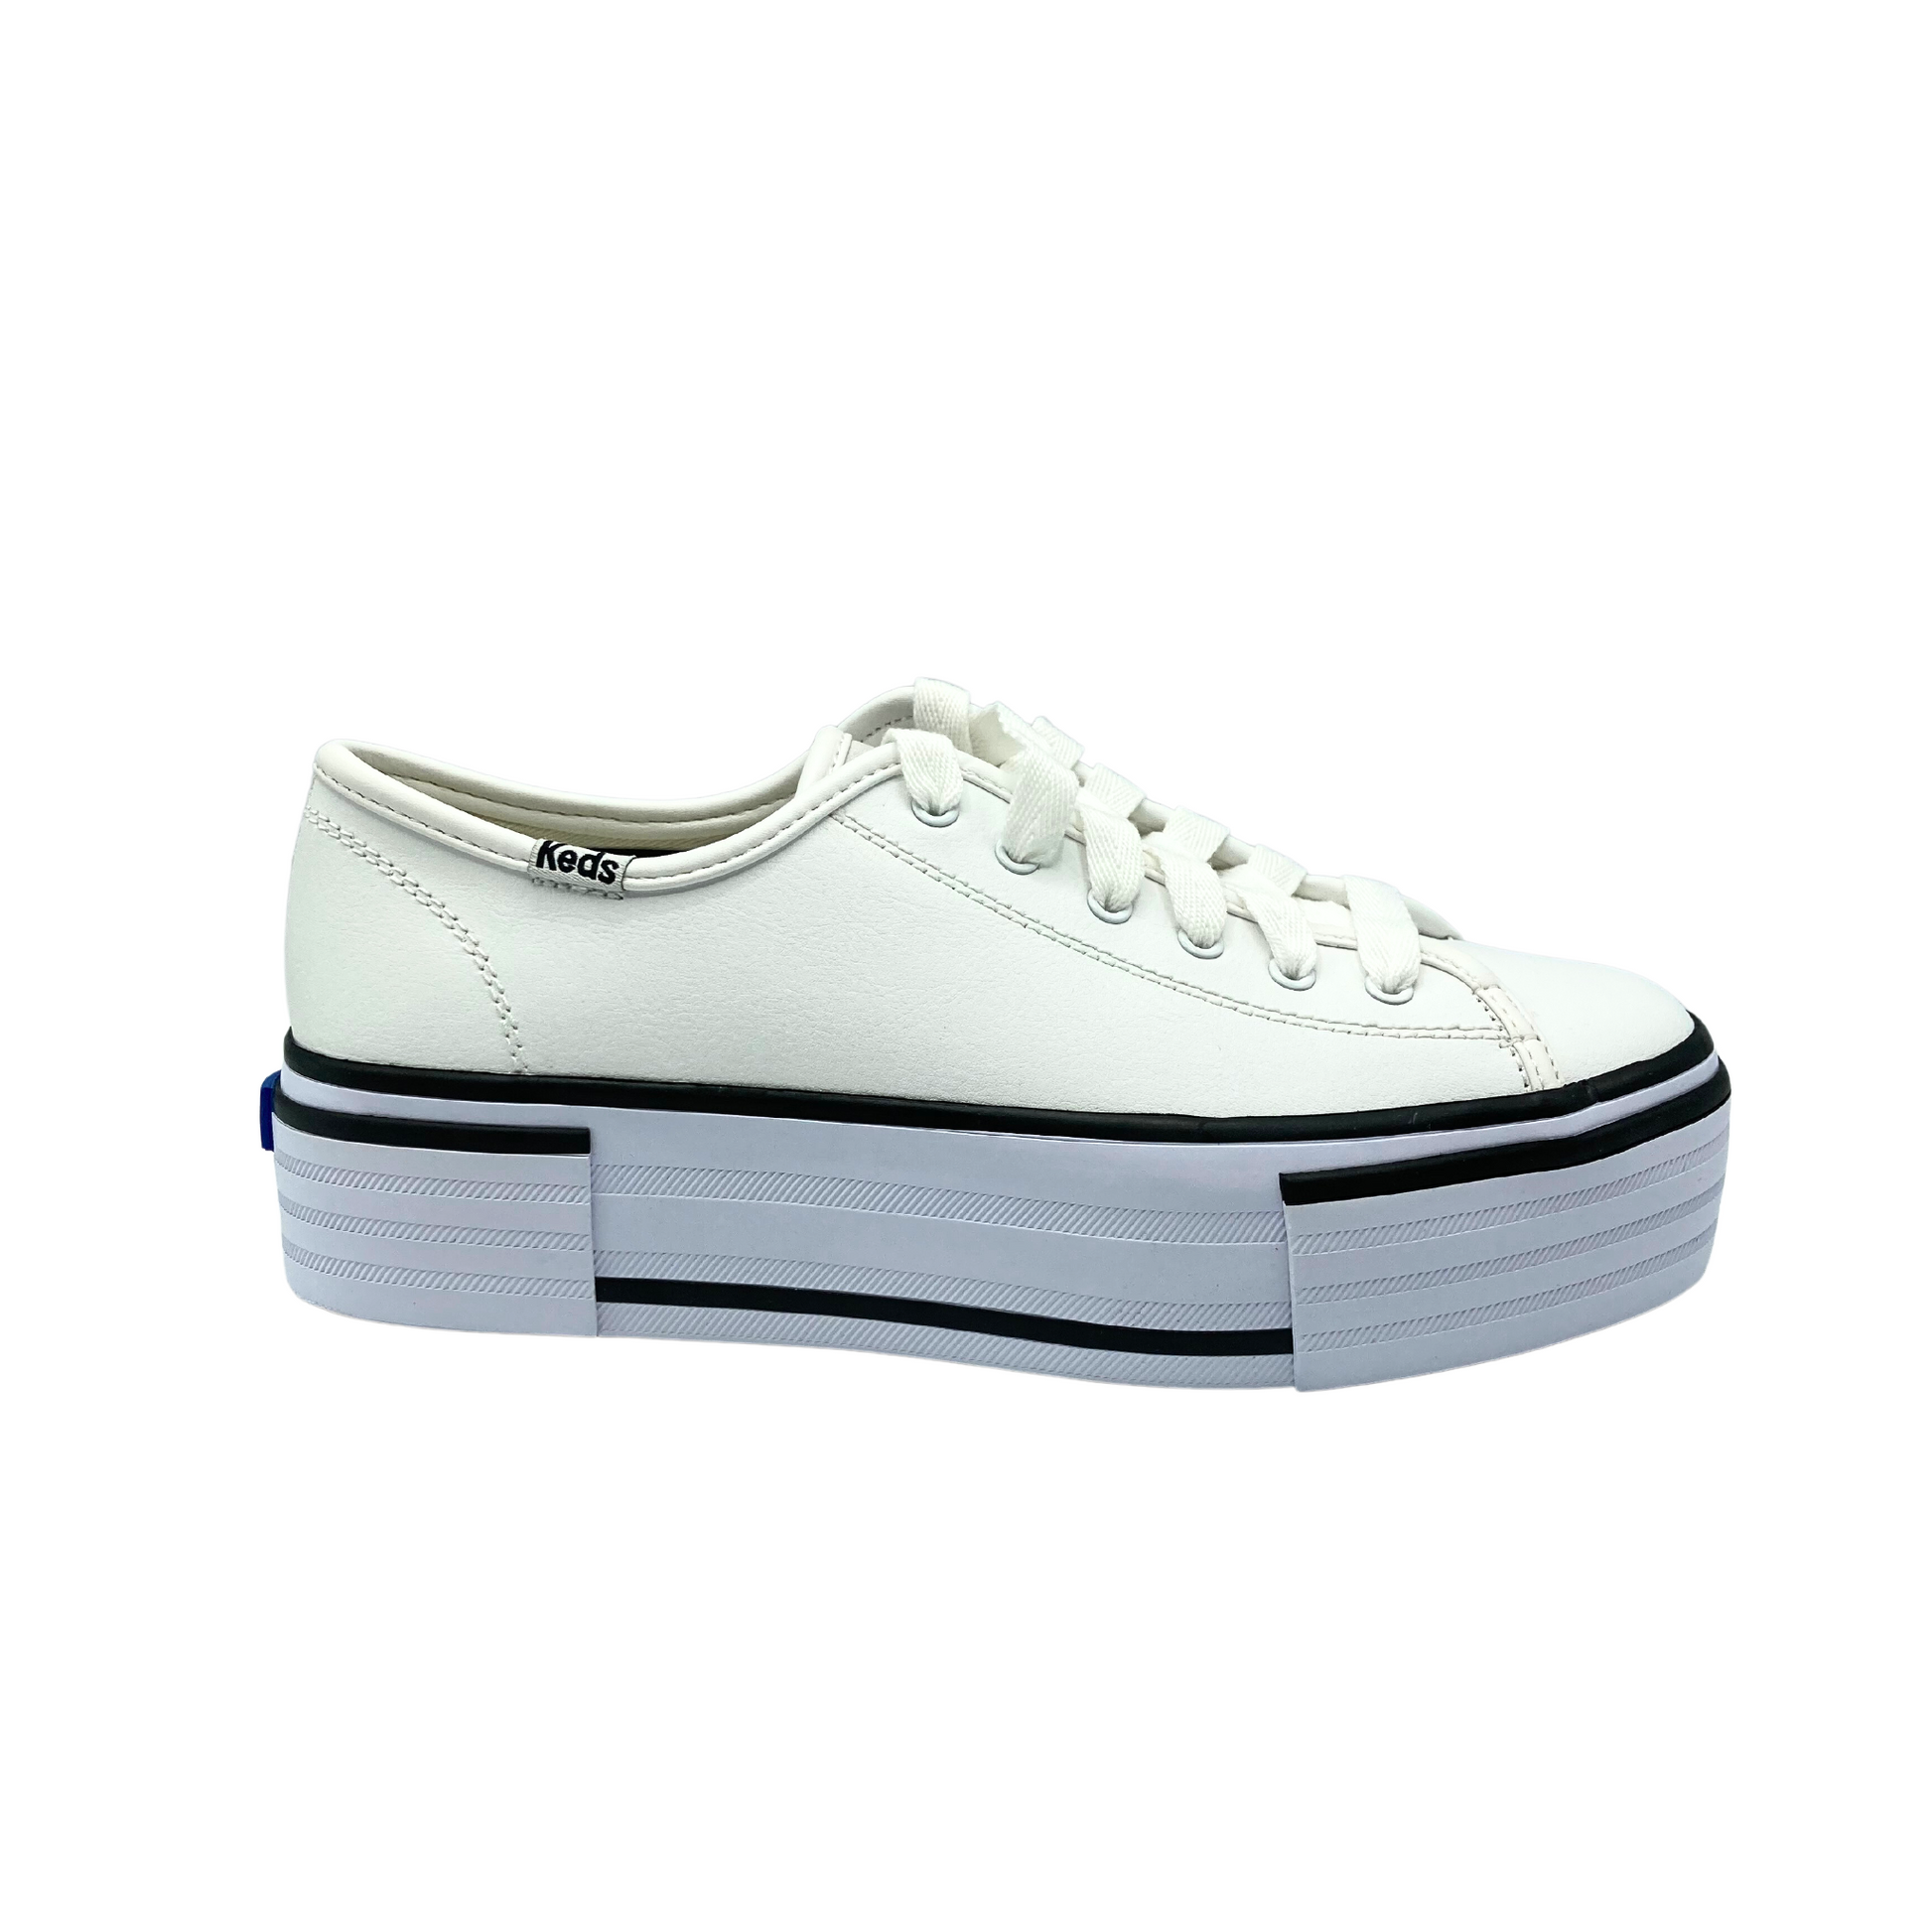 Outside view of a white leather sneaker with white laces.  Rubber platform sole with dark stripe details